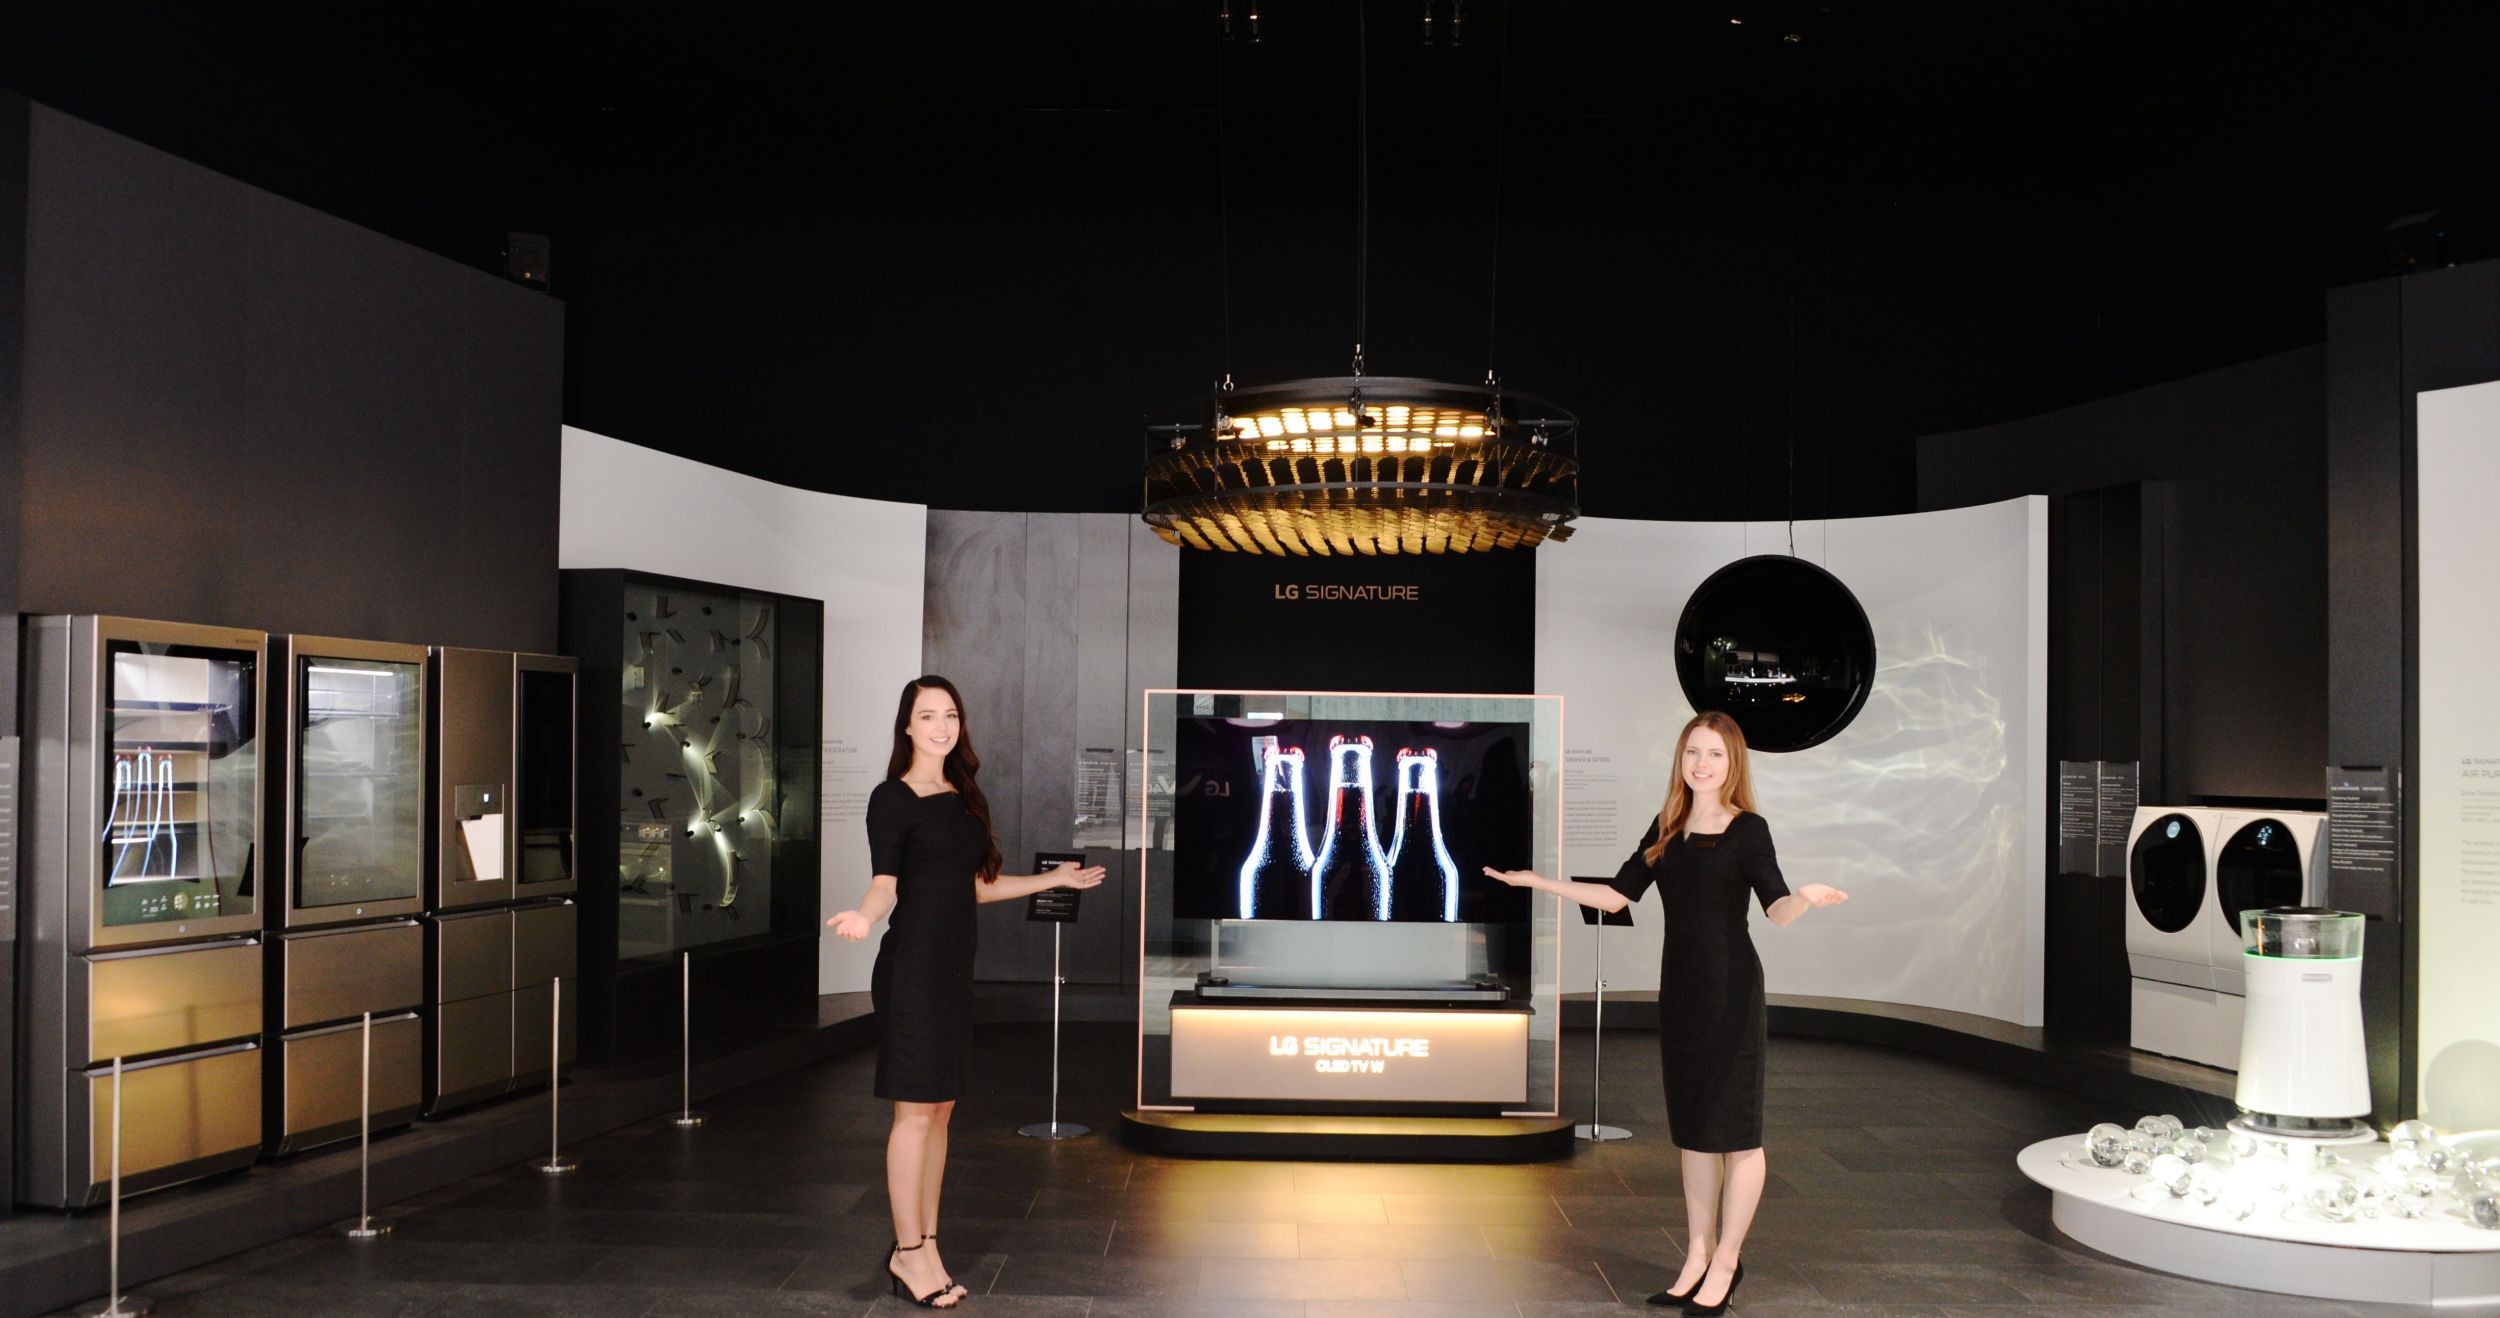 Two female models open their arms up to invite people to the LG SIGNATURE brand zone.